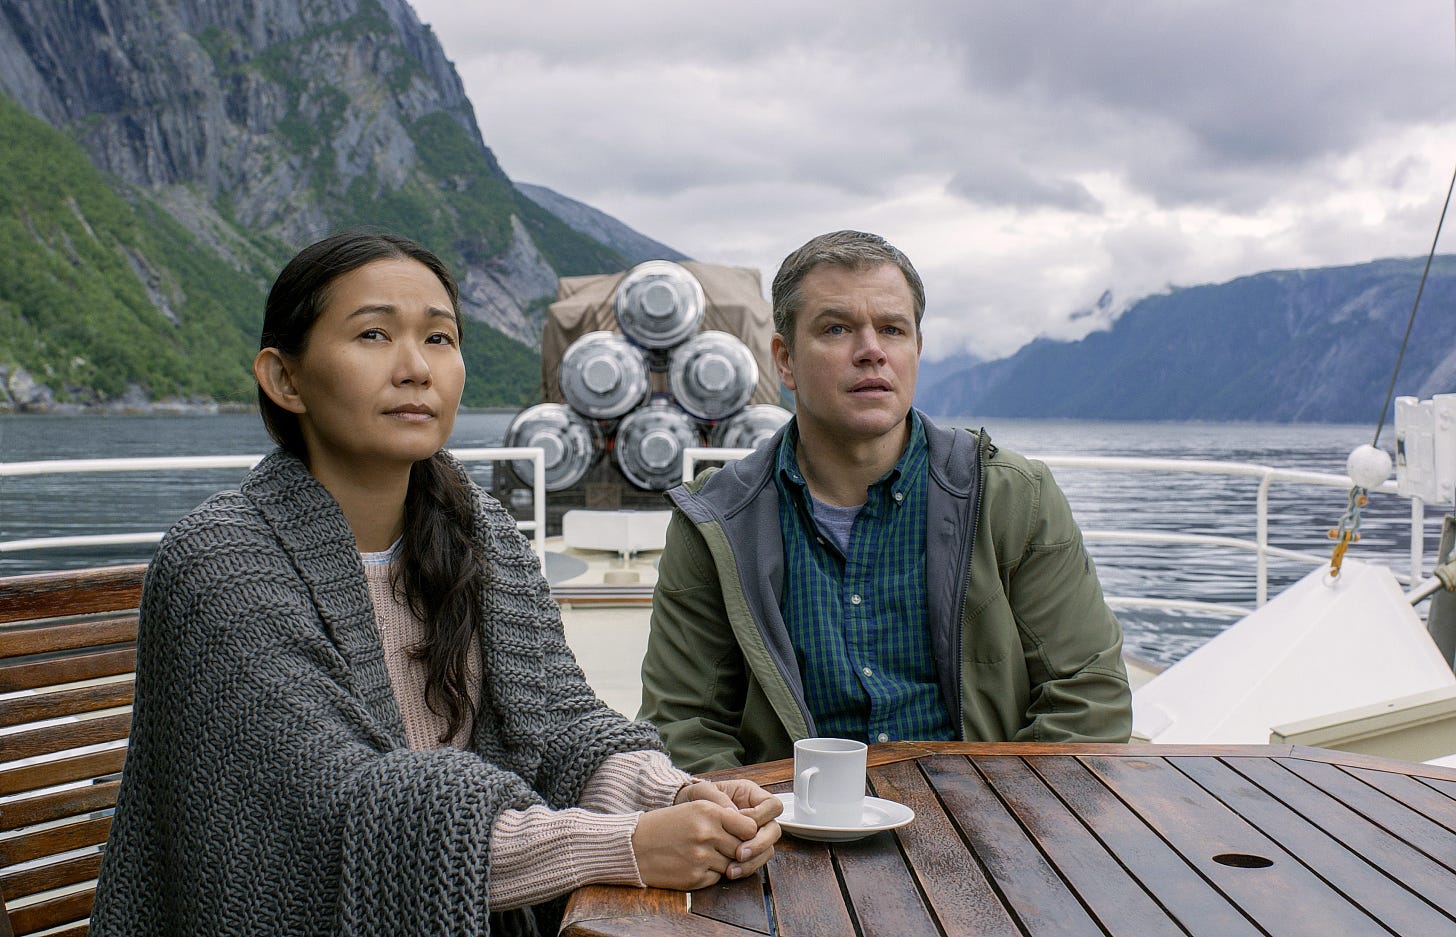 Hong Chau and Matt Damon sit on a barge in a scene from Downsizing